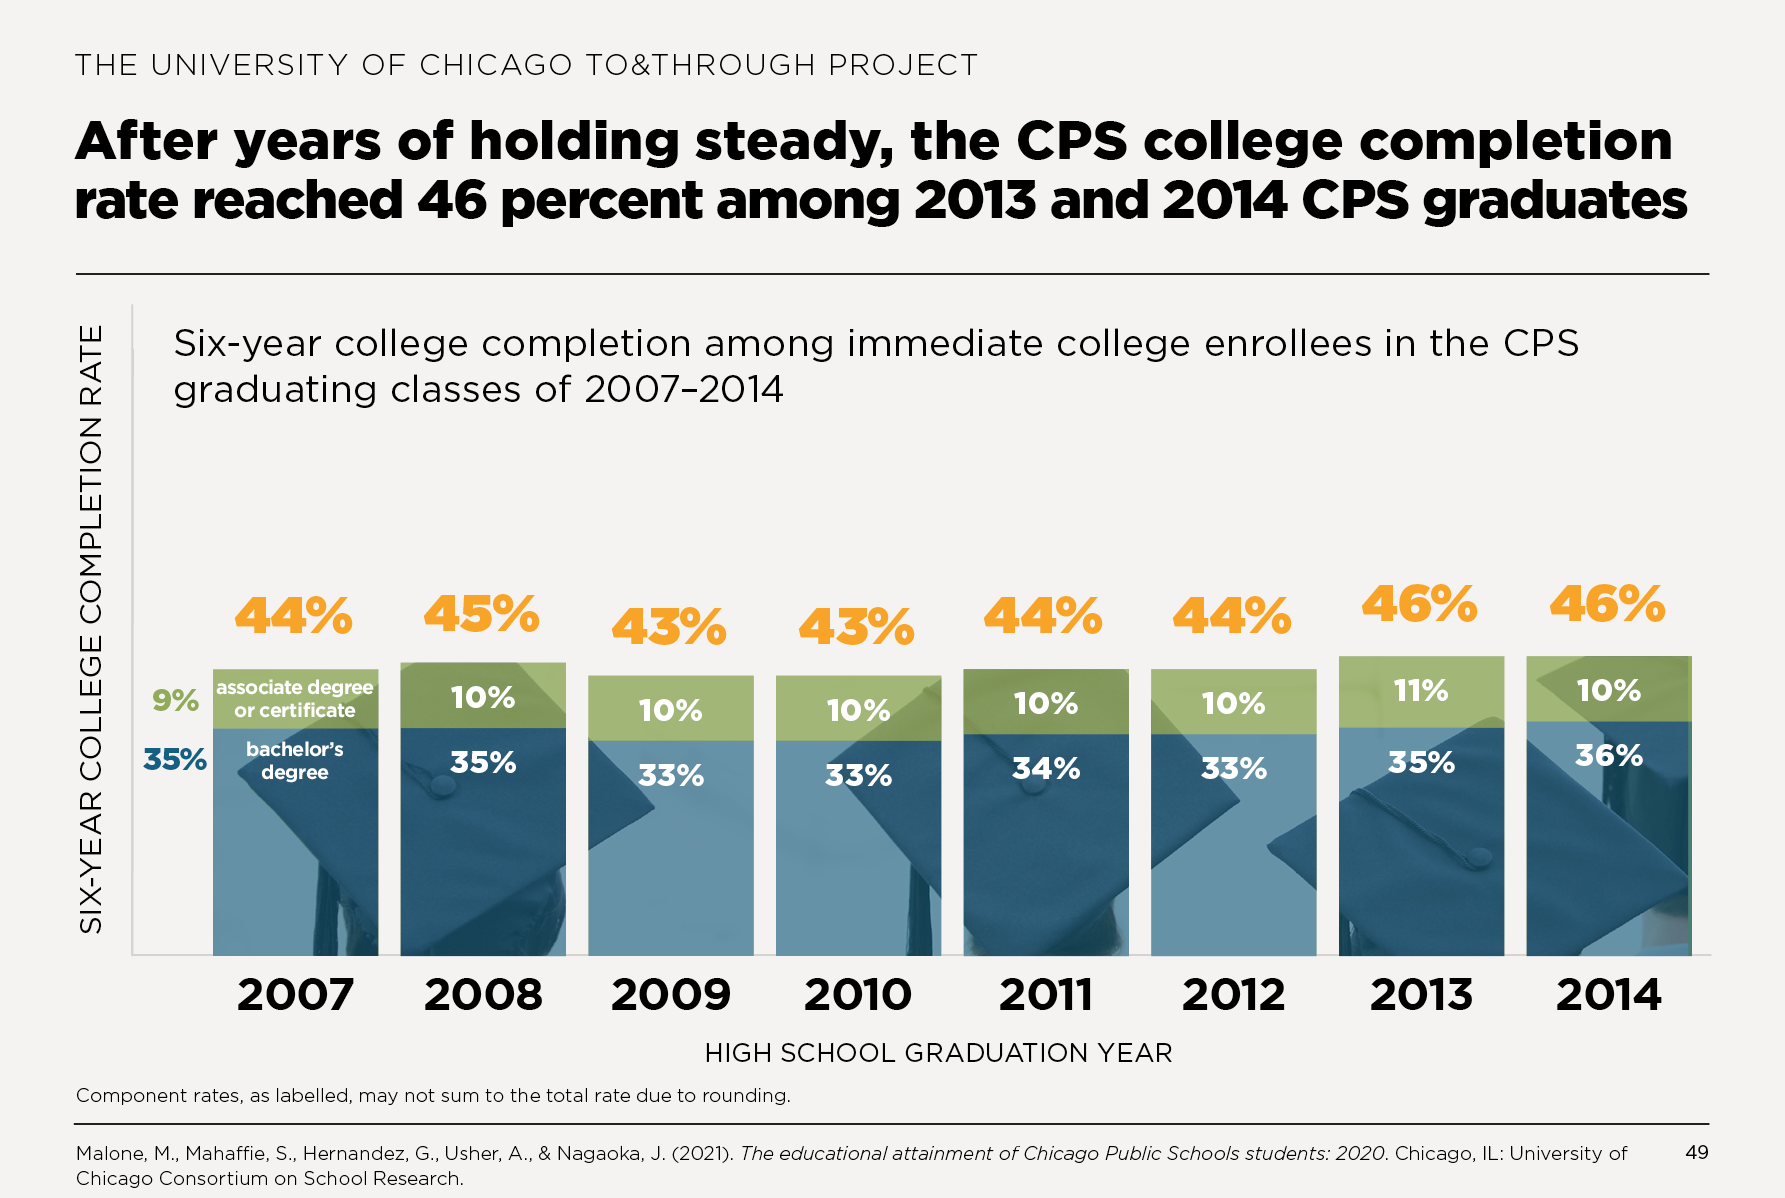 After years of holding steady, the CPS college completion rate reached 46 percent among 2013 and 2014 CPS graduates